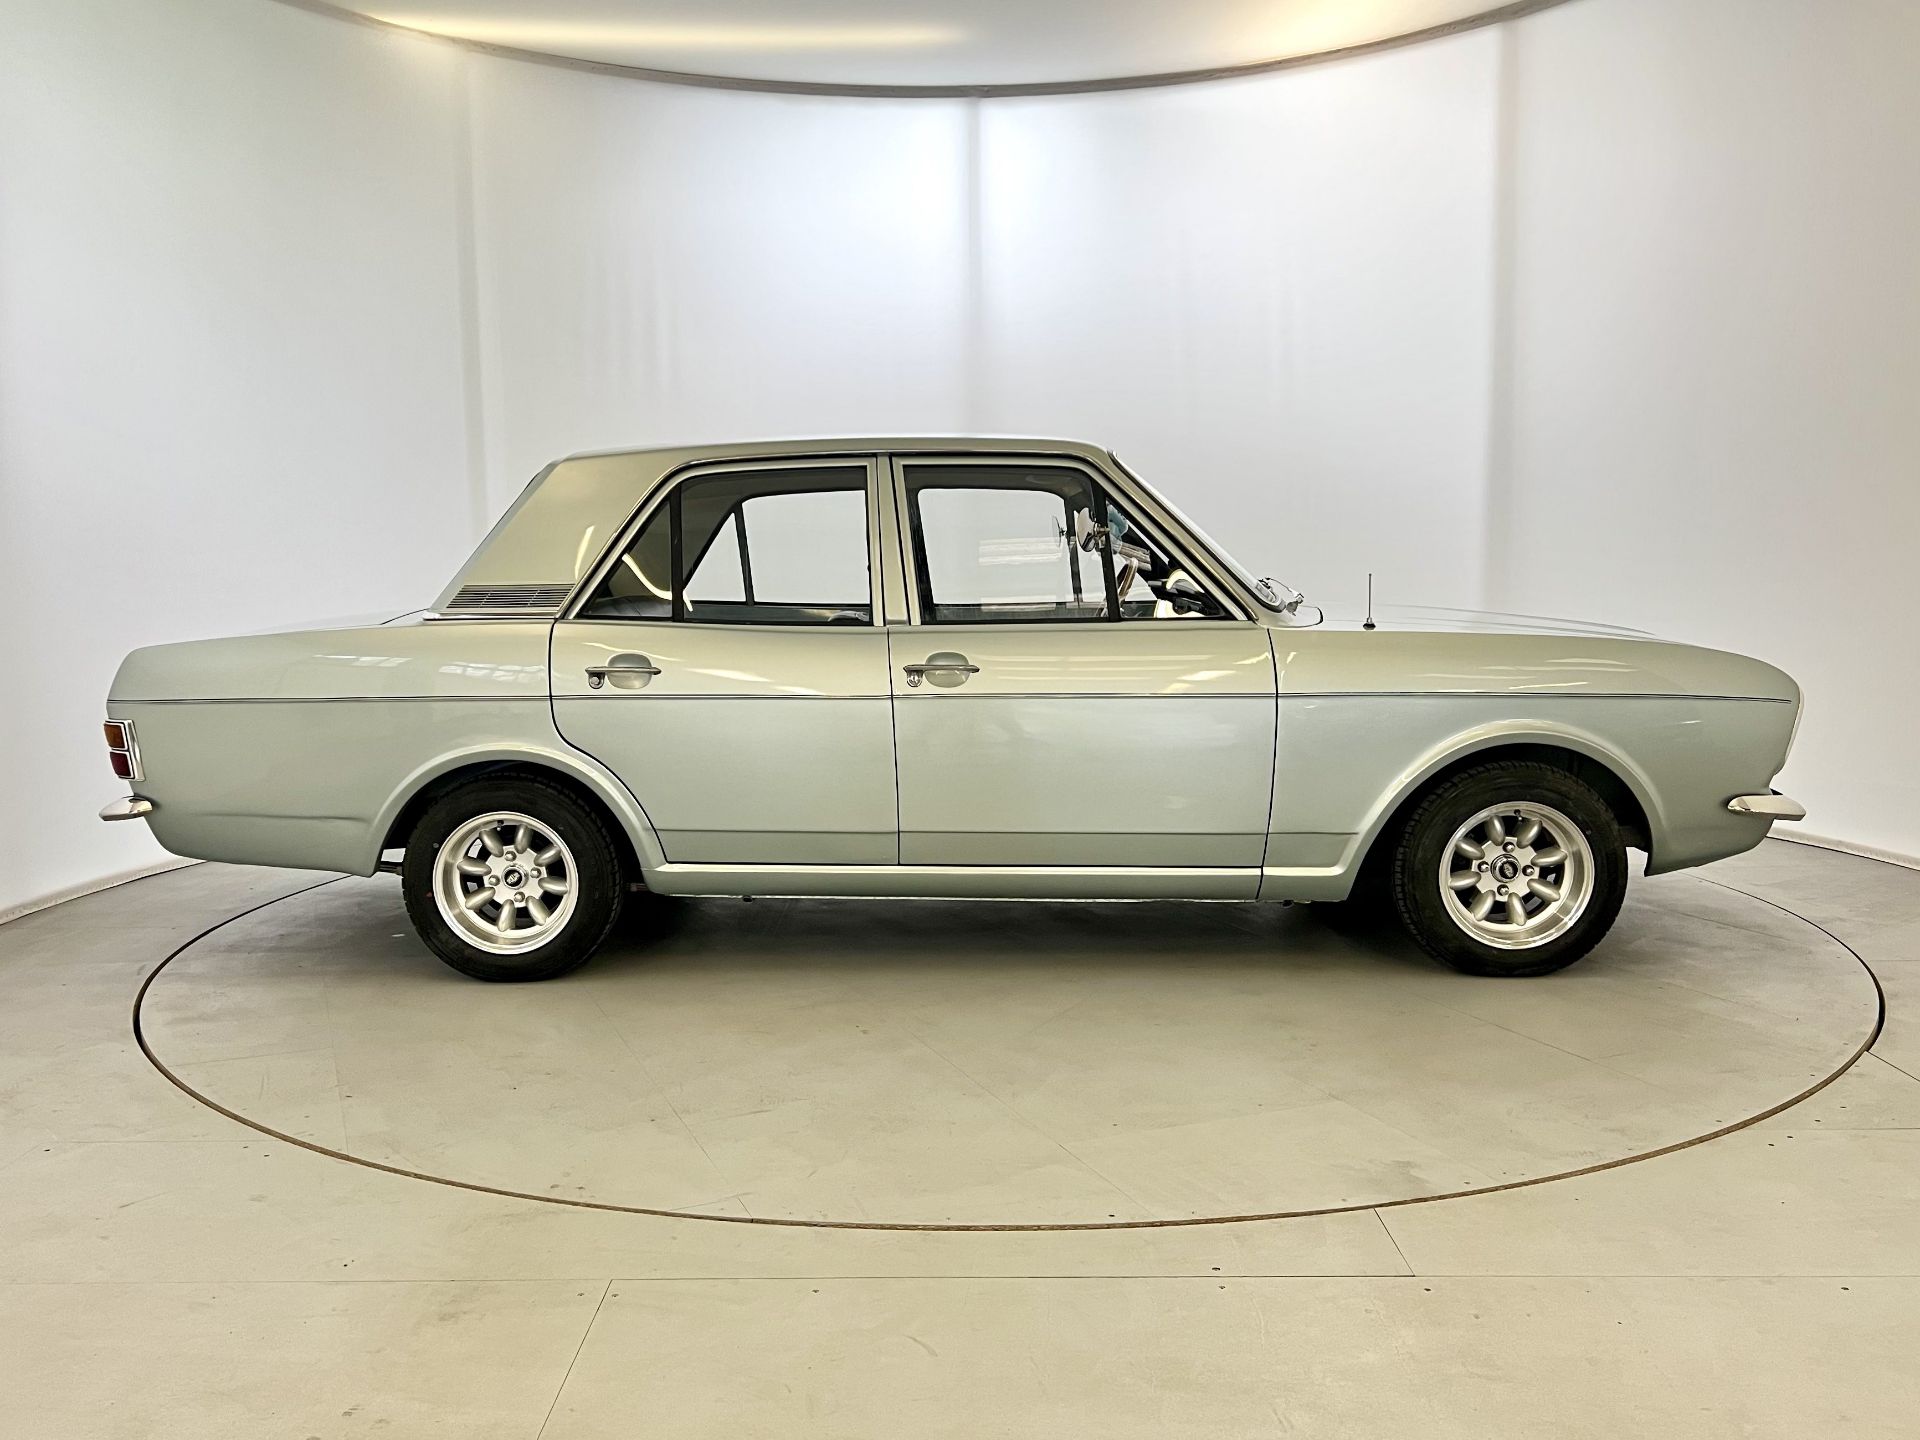 Ford Cortina 1300 DeLuxe - Image 11 of 36